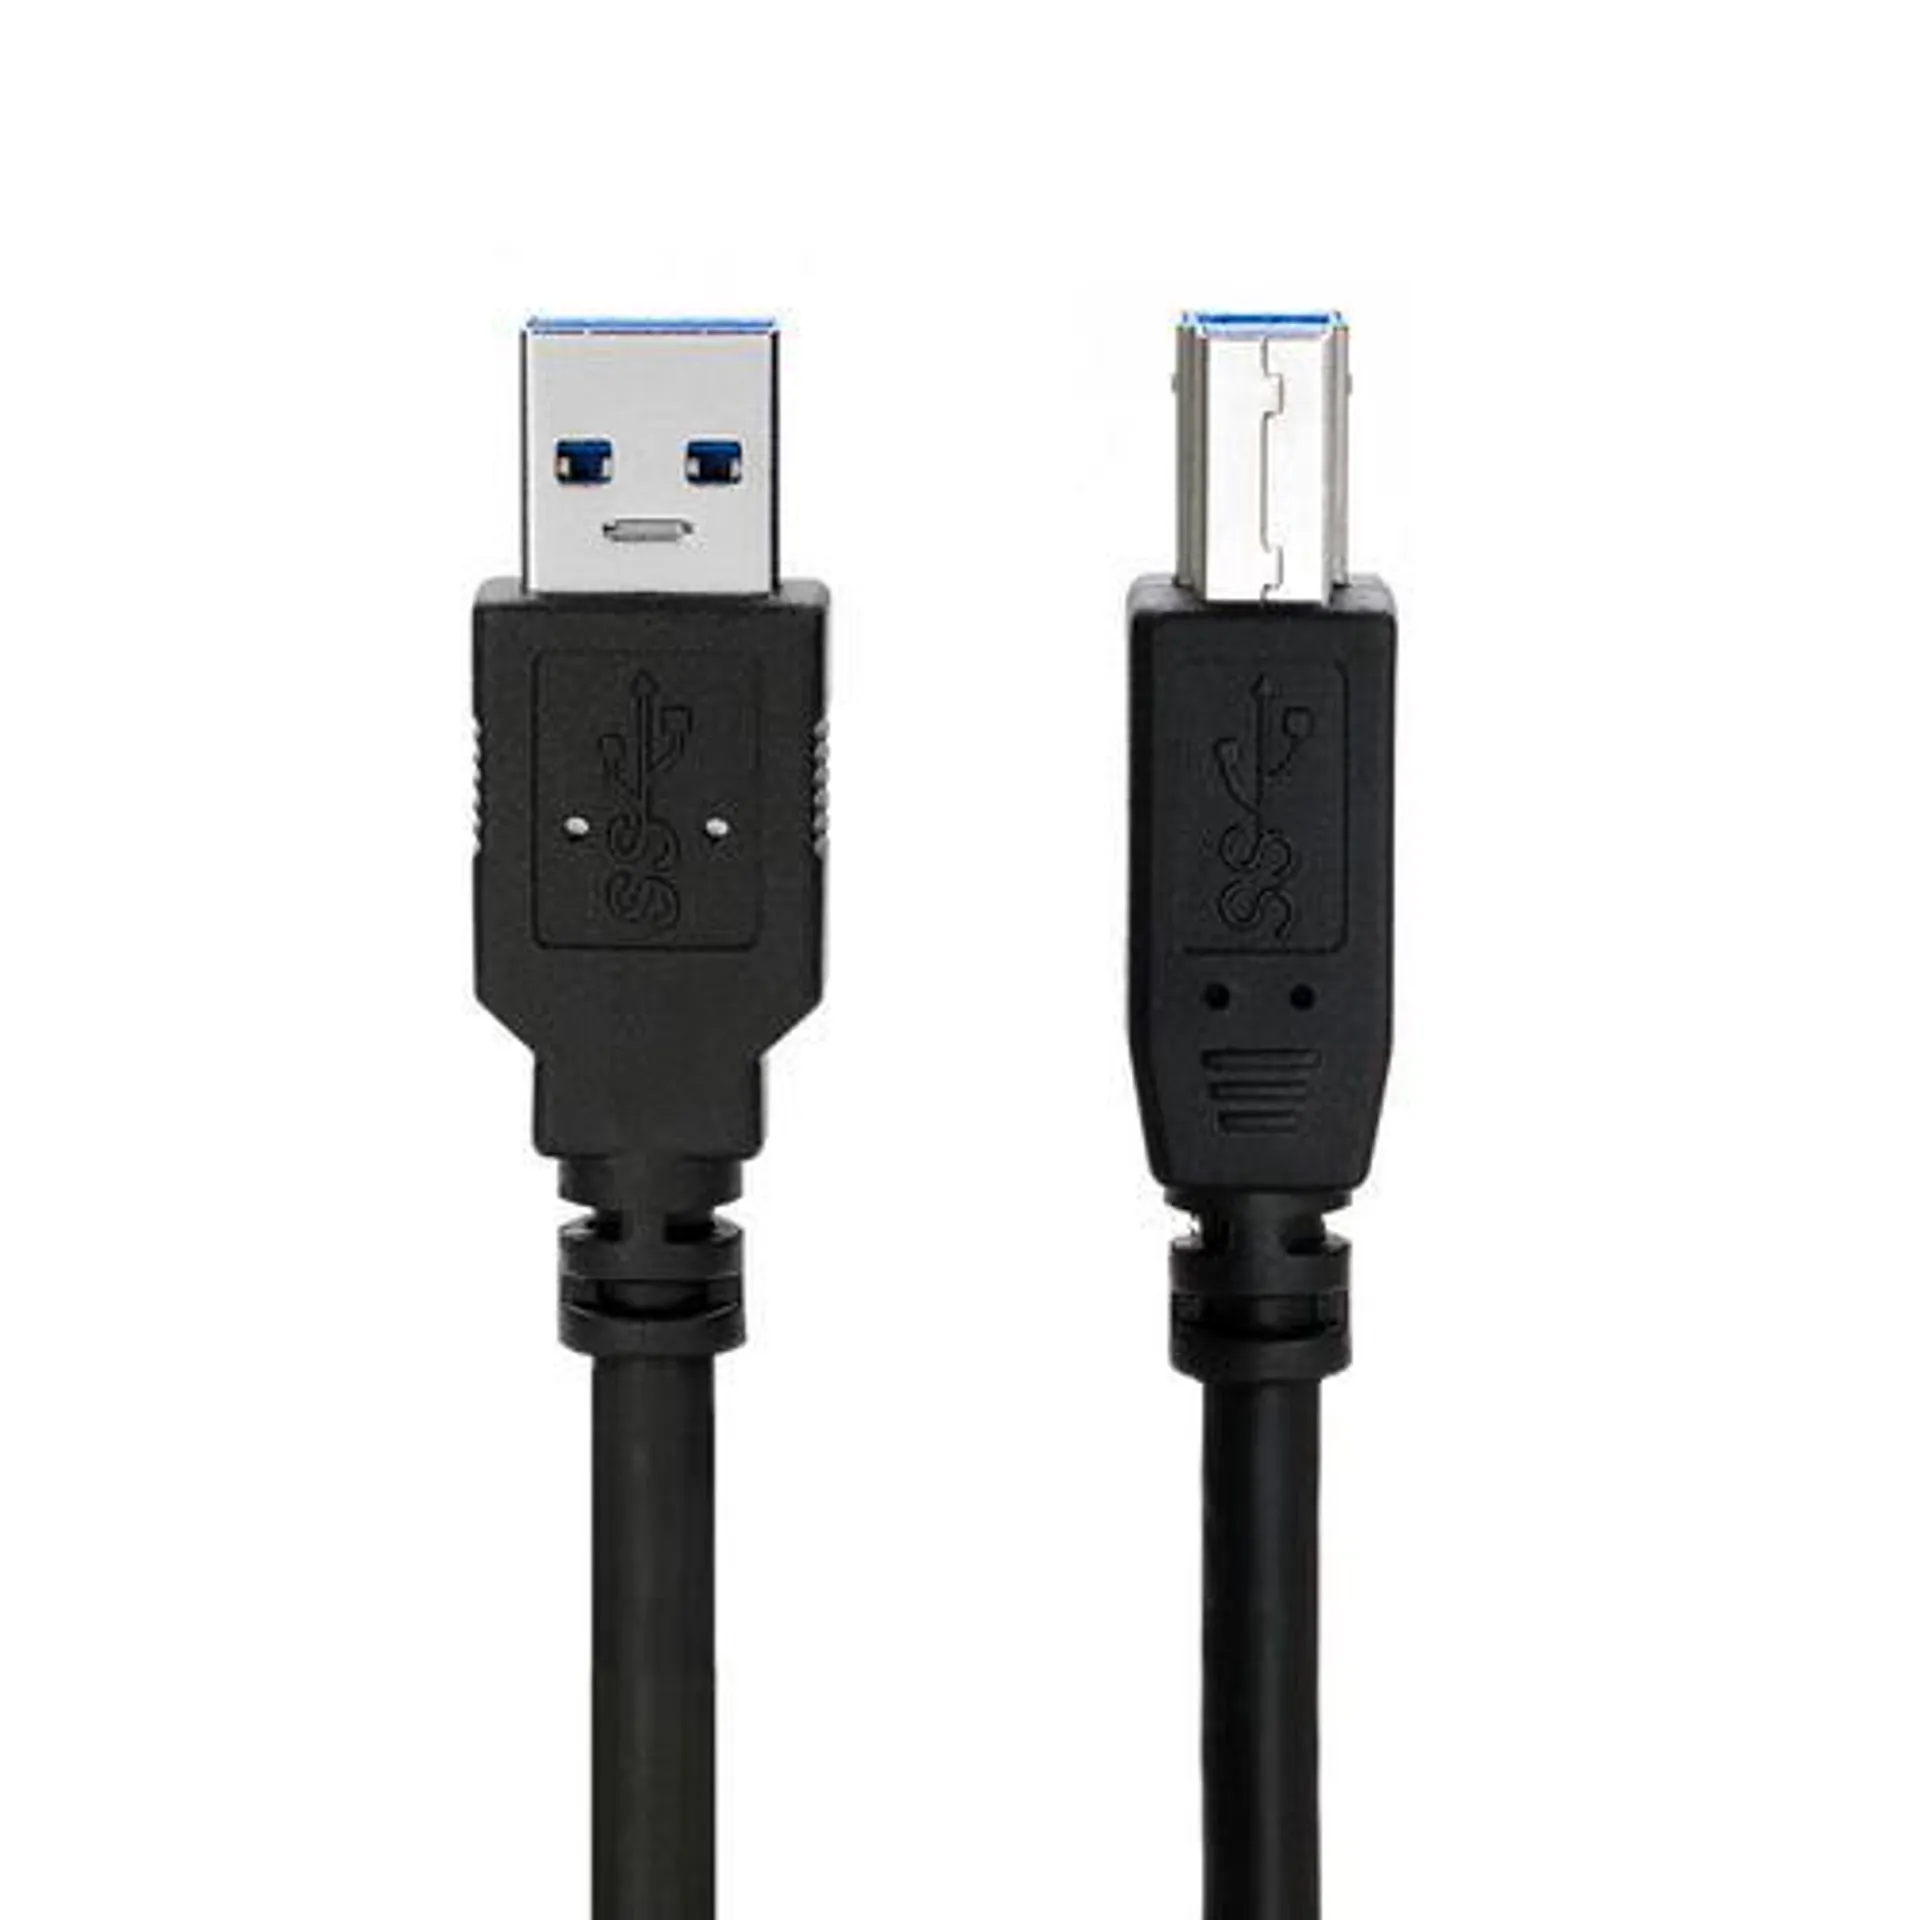 USB 3.0 A Male to B Male Cable - Black - 3ft - PrimeCables®